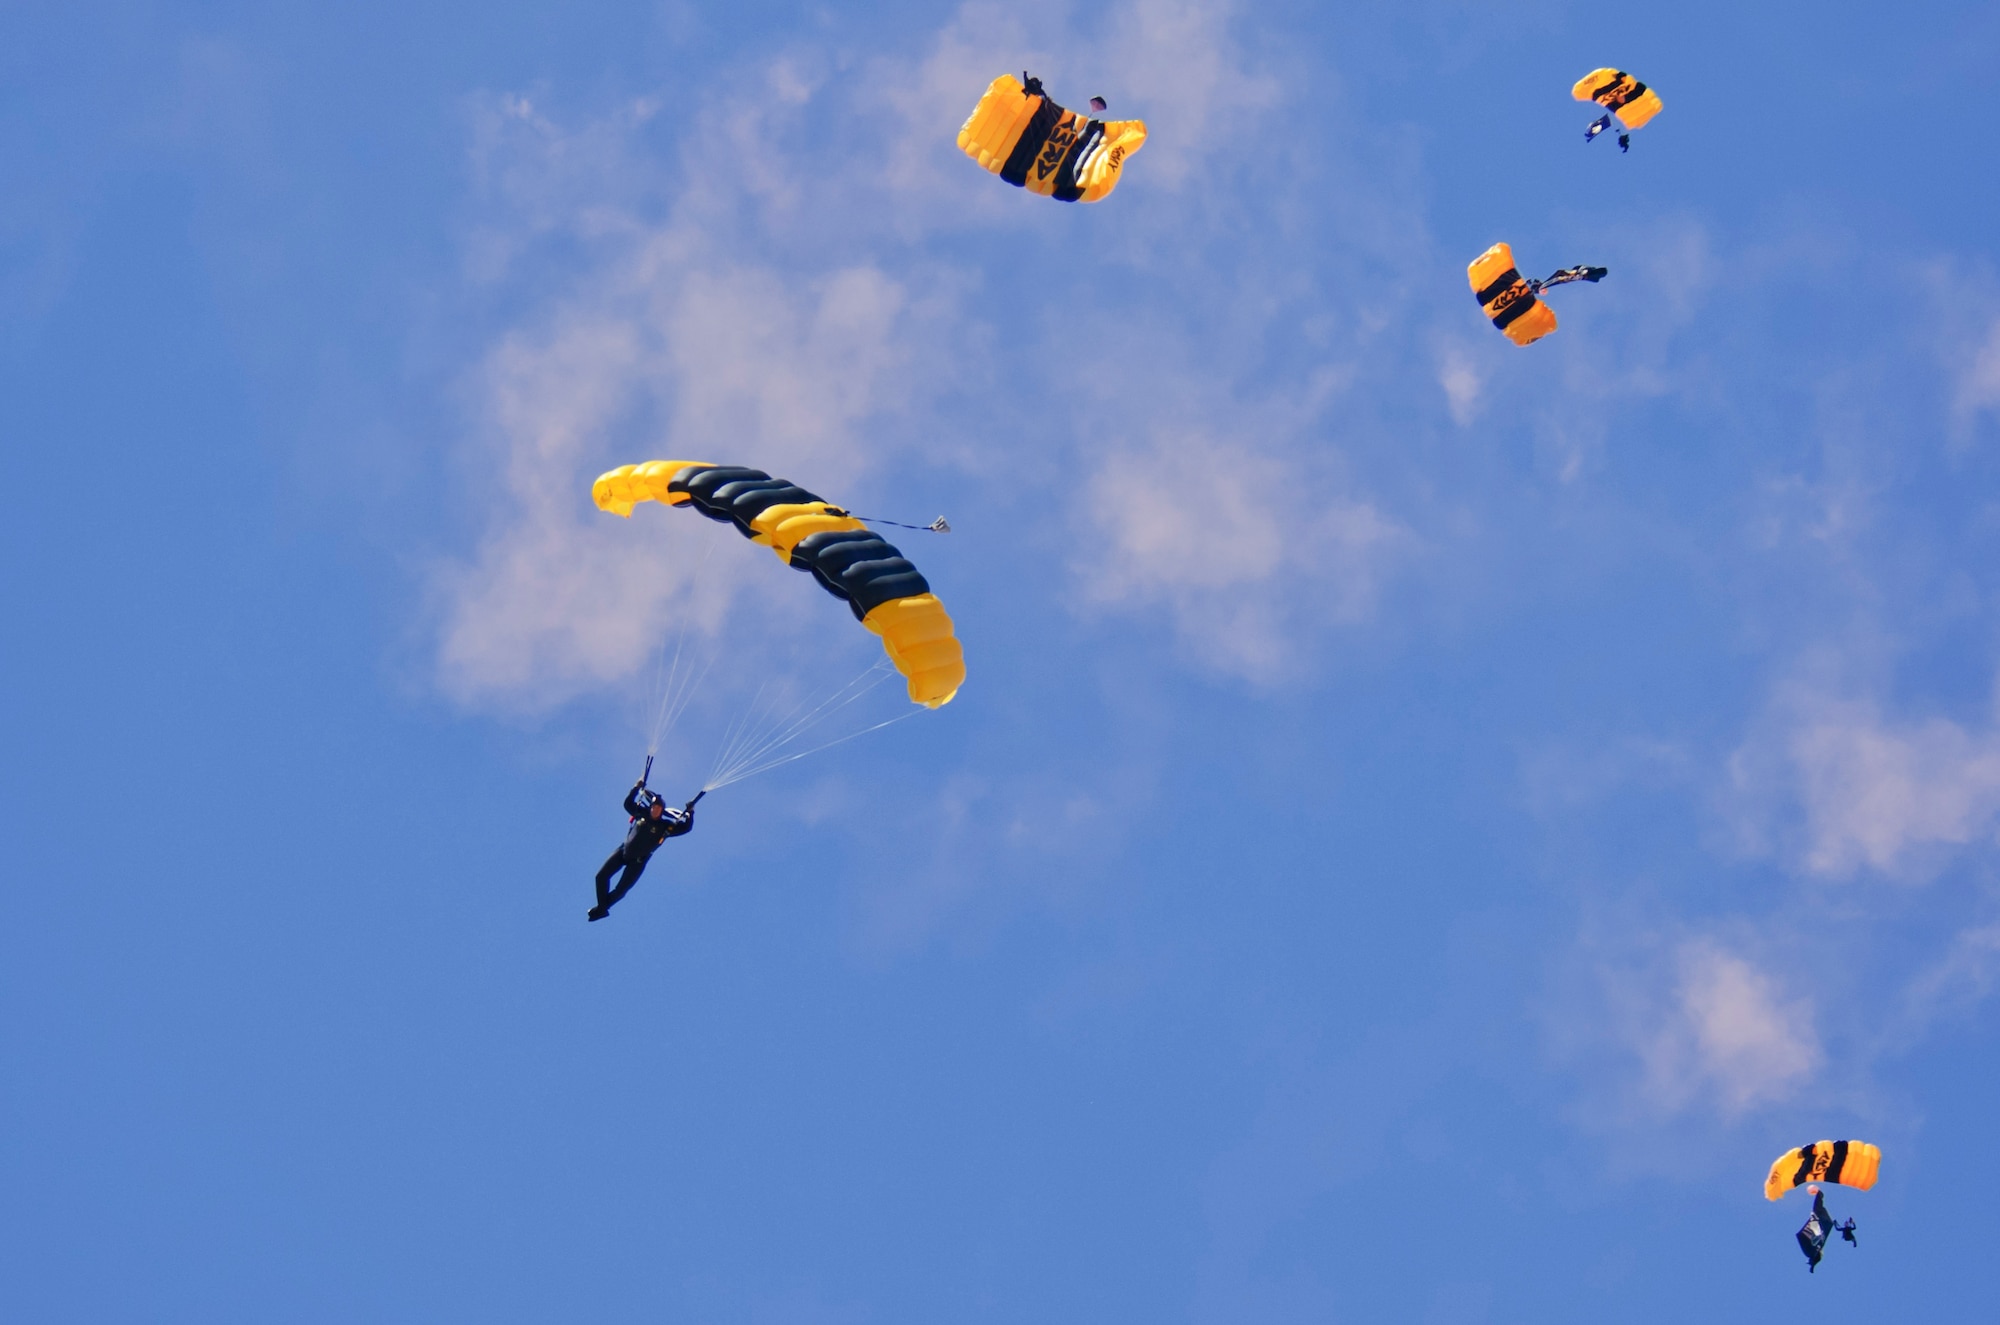 The U.S. Army Golden Knights parachute team perform July 13, 2019, at the “Mission Over Malmstrom” open house event on Malmstrom Air Force Base, Mont.